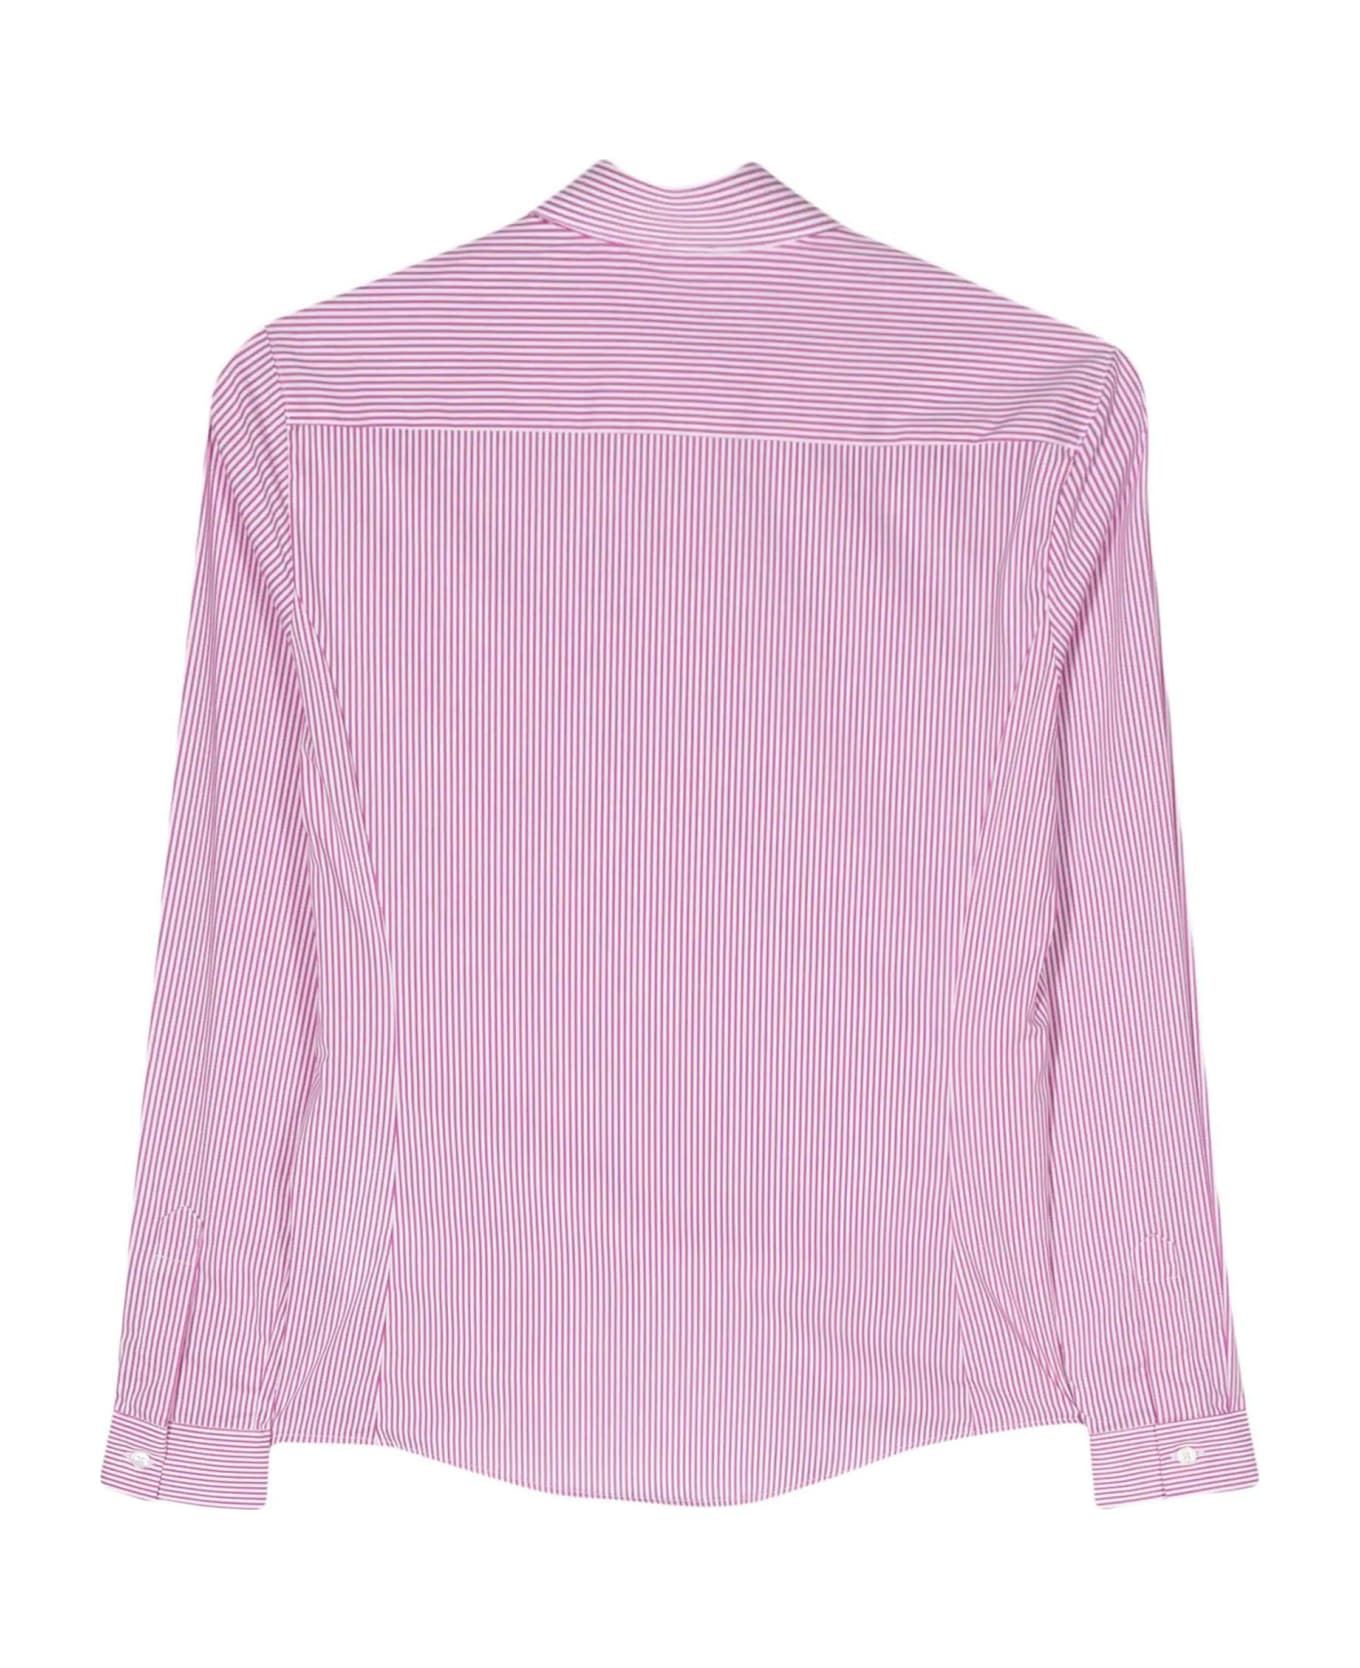 Fay White And Pink Stretch Cotton Shirt - Pink シャツ